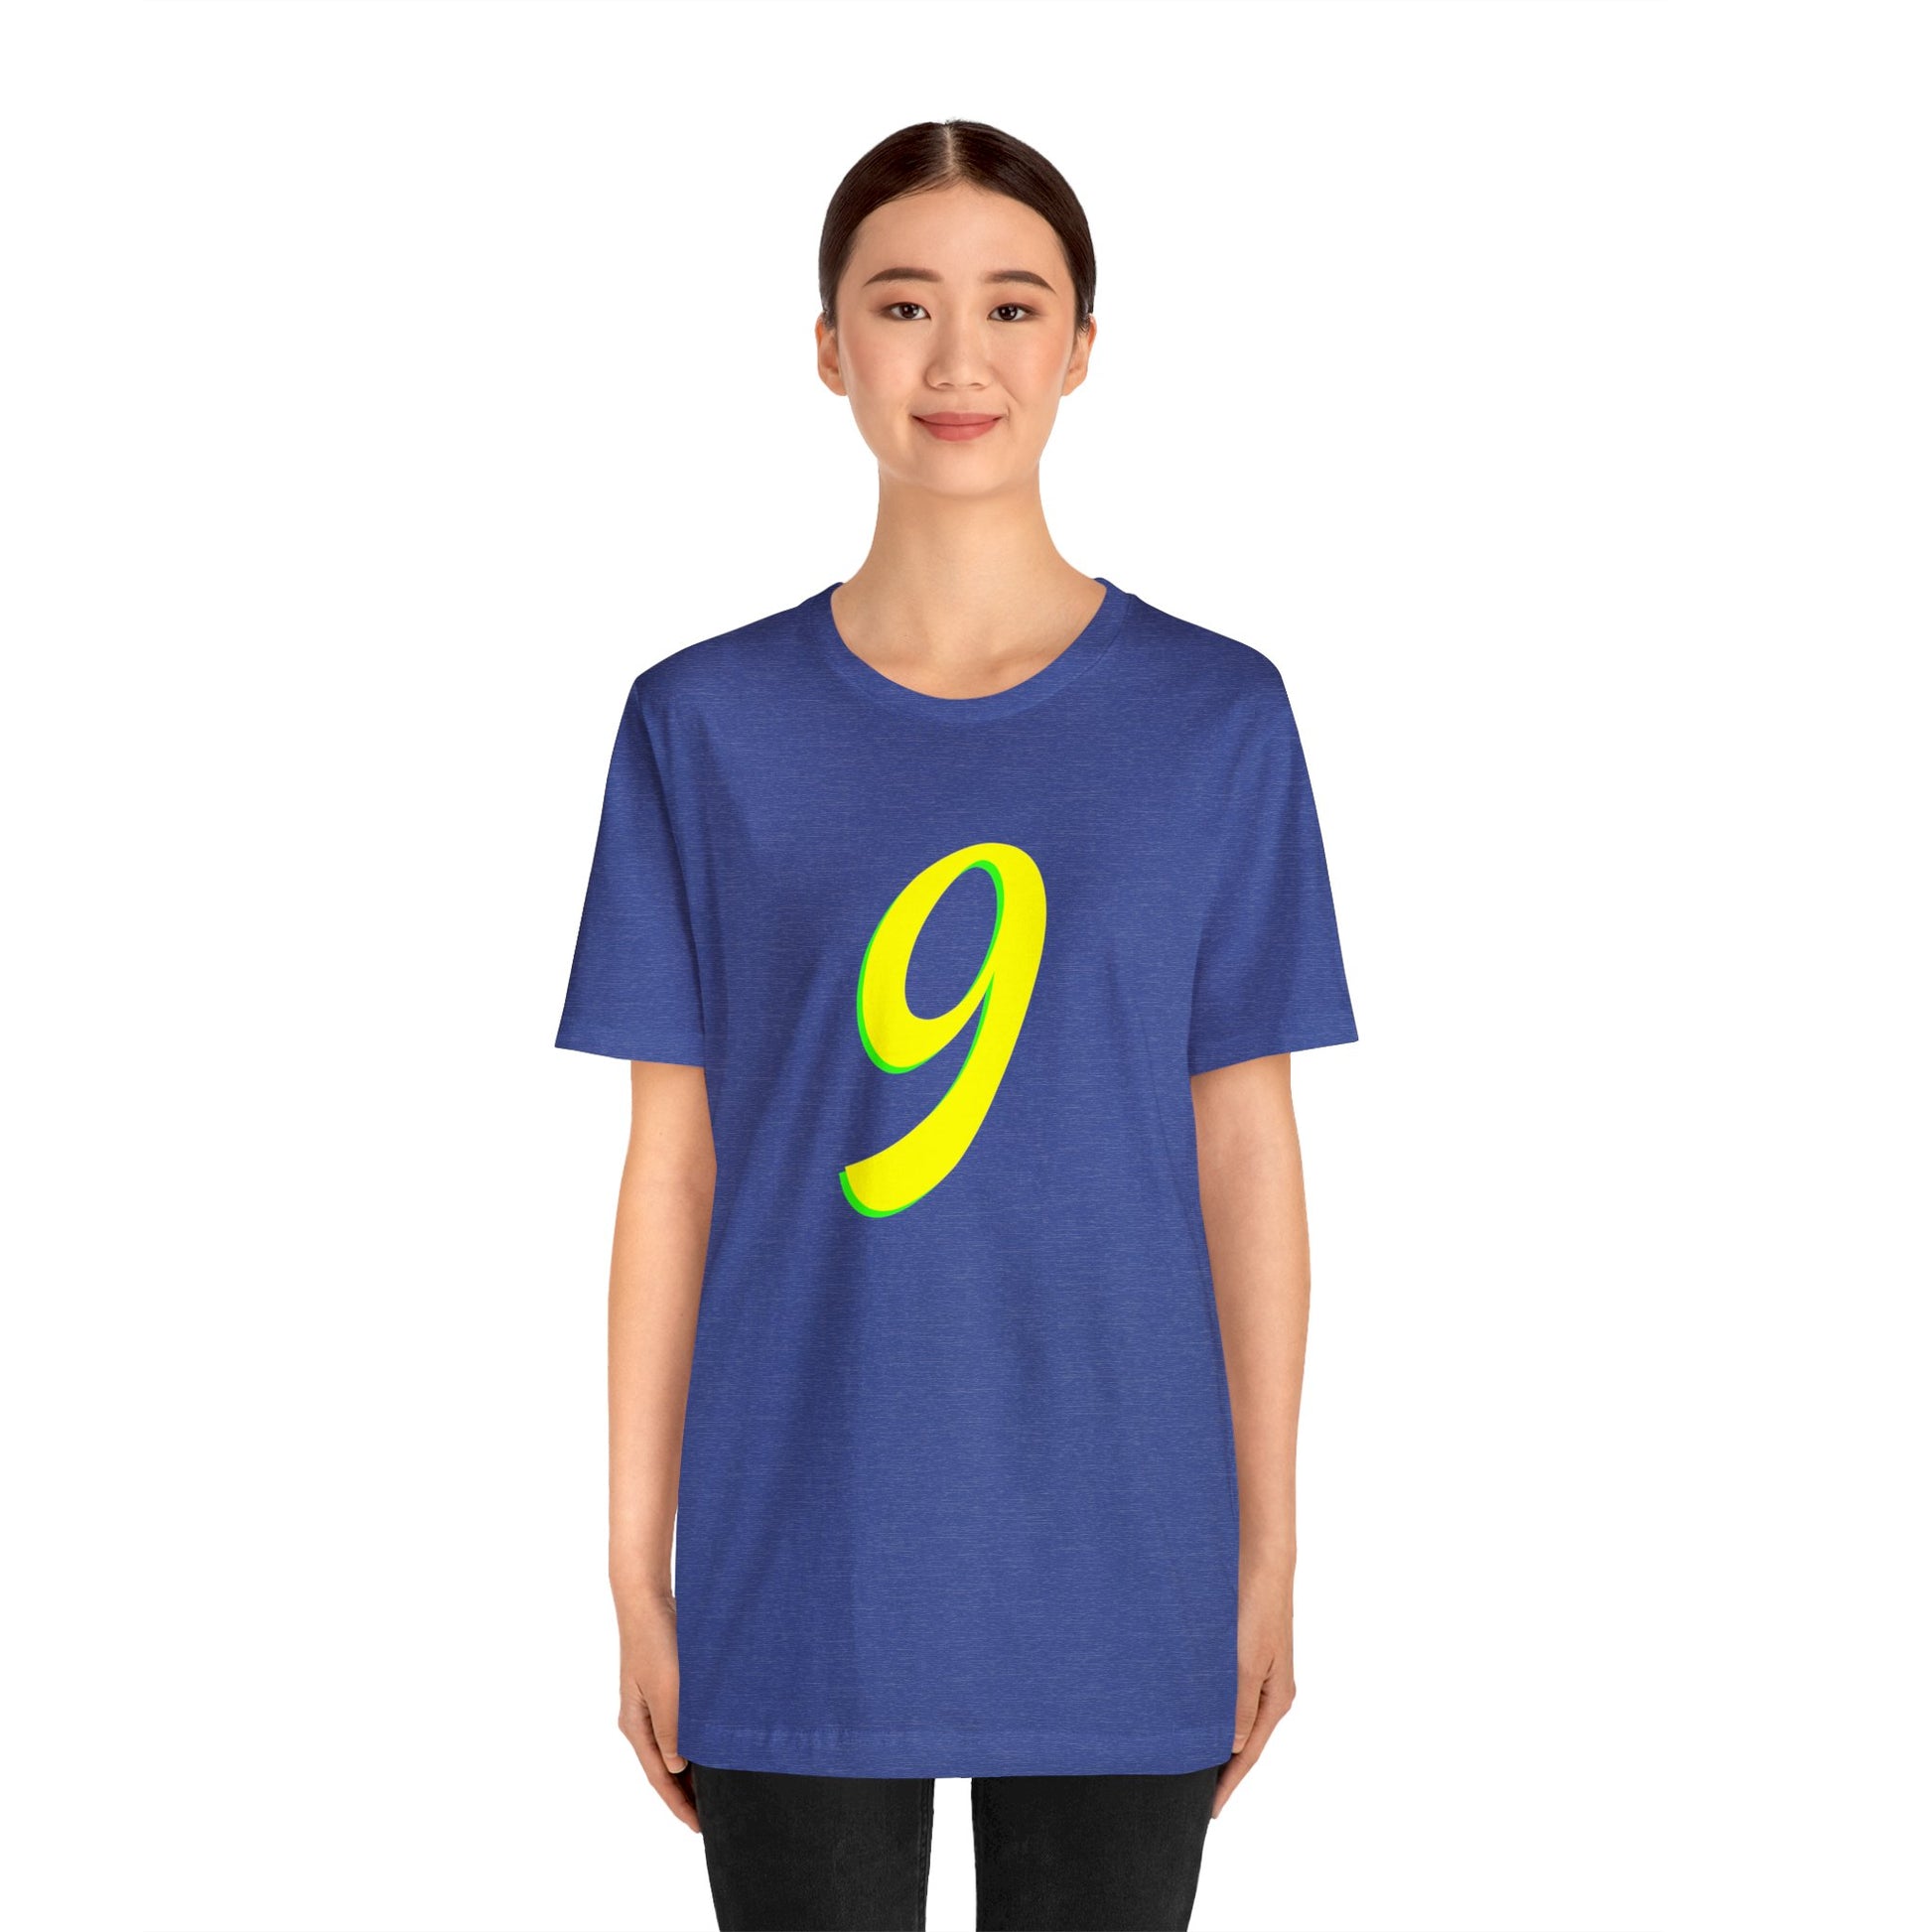 Number 9 Design - Soft Cotton Tee for birthdays and celebrations, Gift for friends and family, Multiple Options by clothezy.com in Asphalt Size Medium - Buy Now